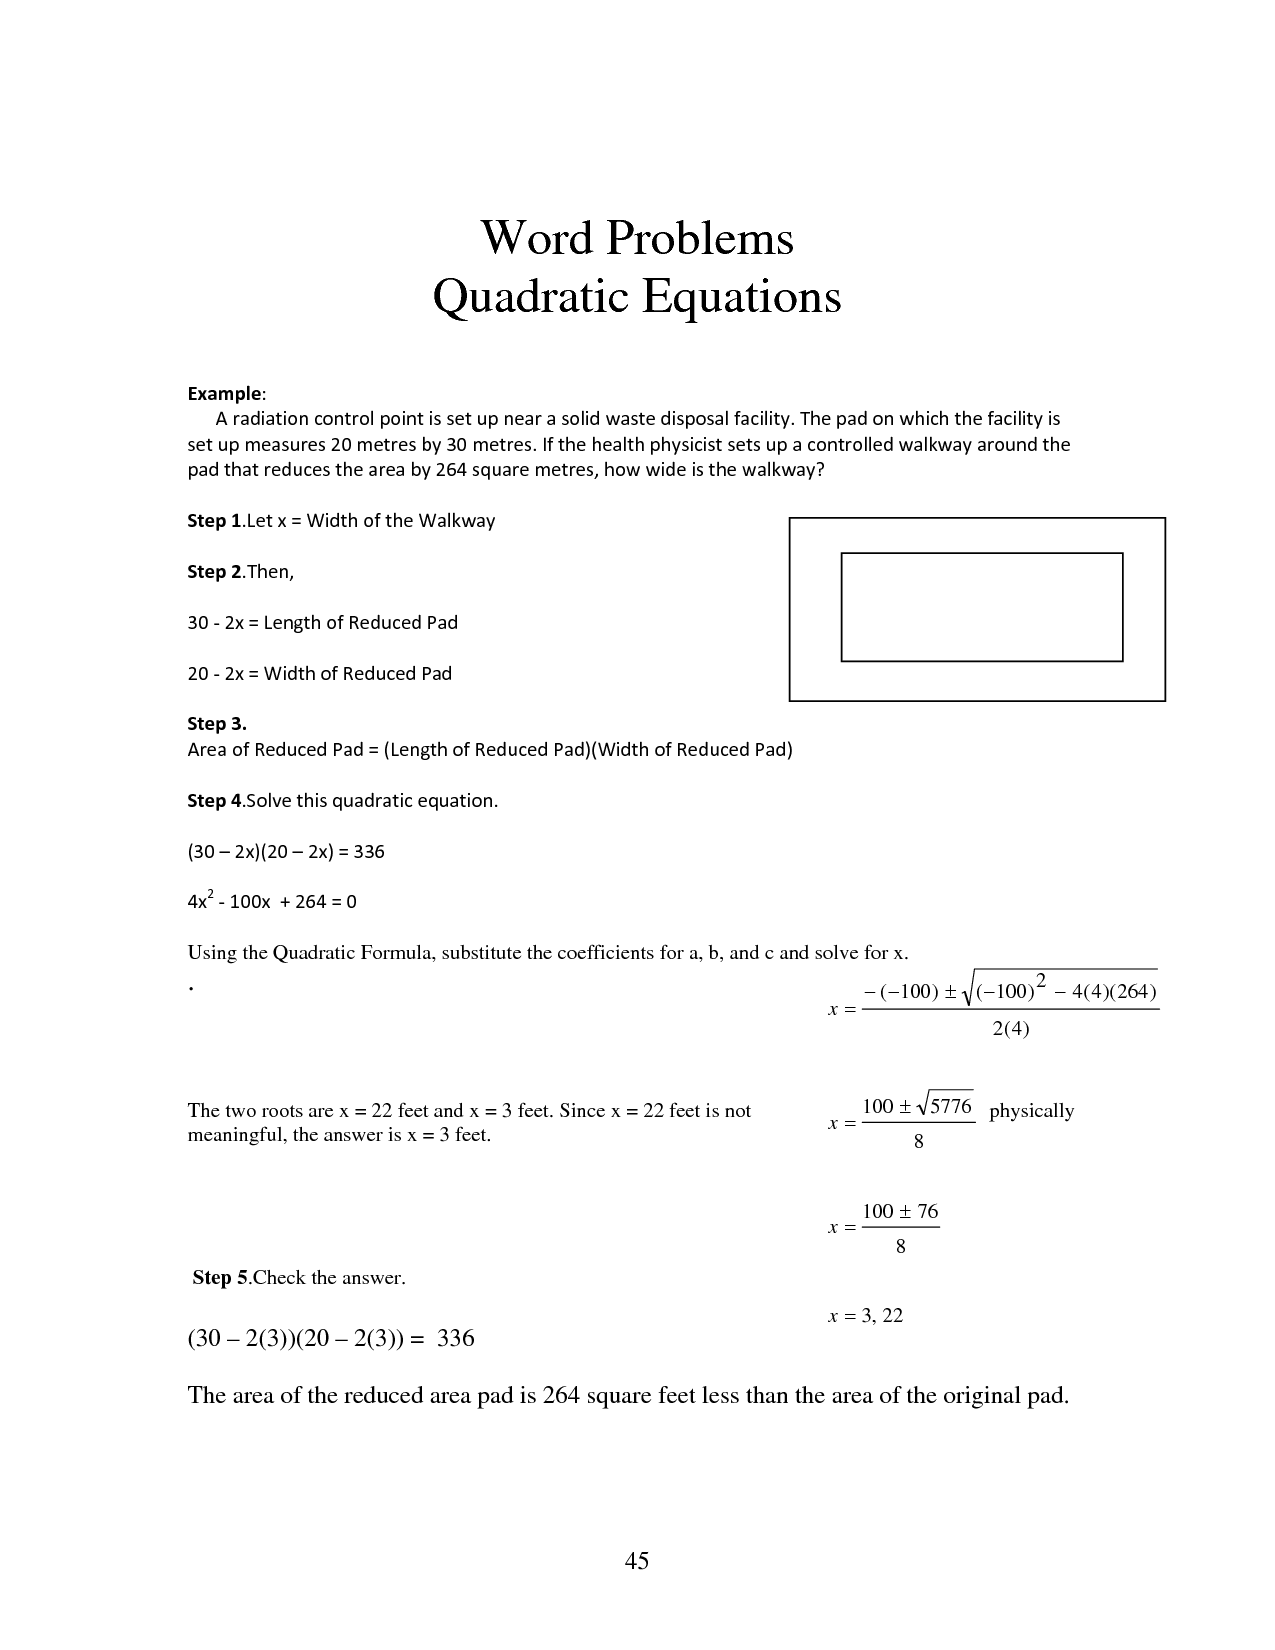 16 Best Images of Worksheet For Word Documents - Quadratic ...